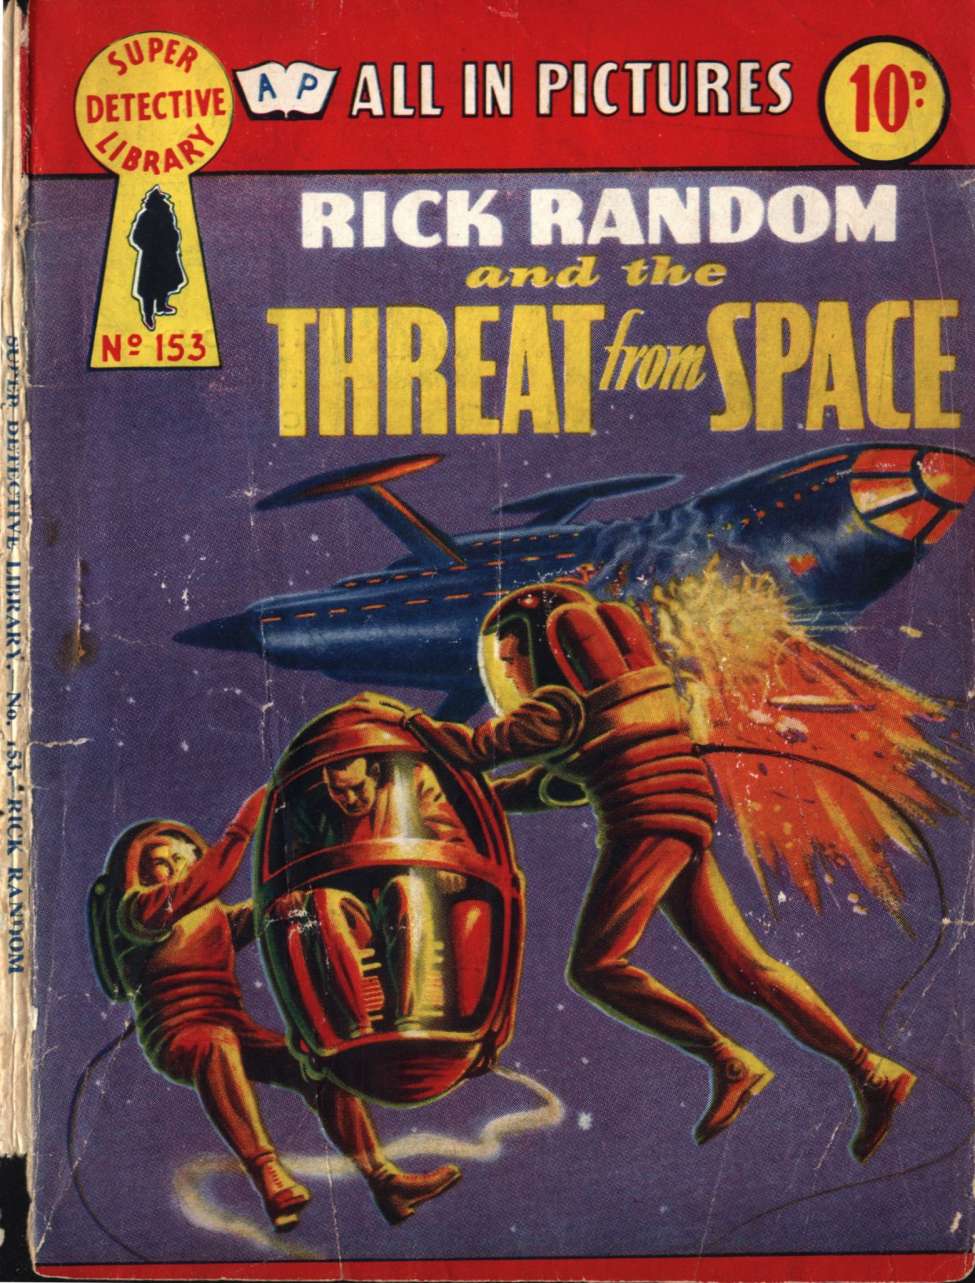 Book Cover For Super Detective Library 153 - The Threat from Space